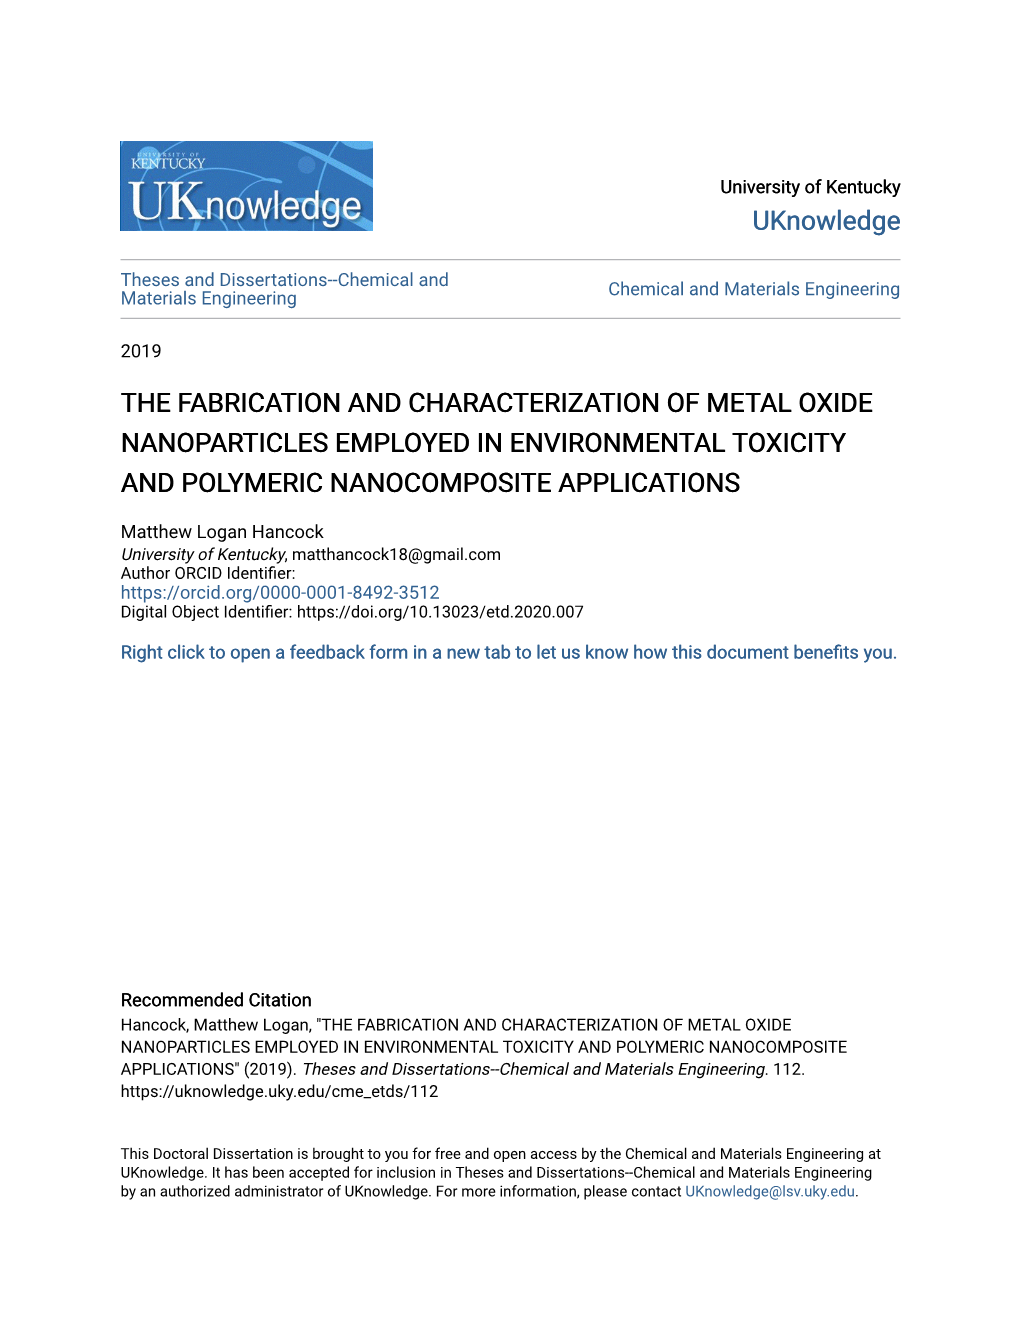 The Fabrication and Characterization of Metal Oxide Nanoparticles Employed in Environmental Toxicity and Polymeric Nanocomposite Applications